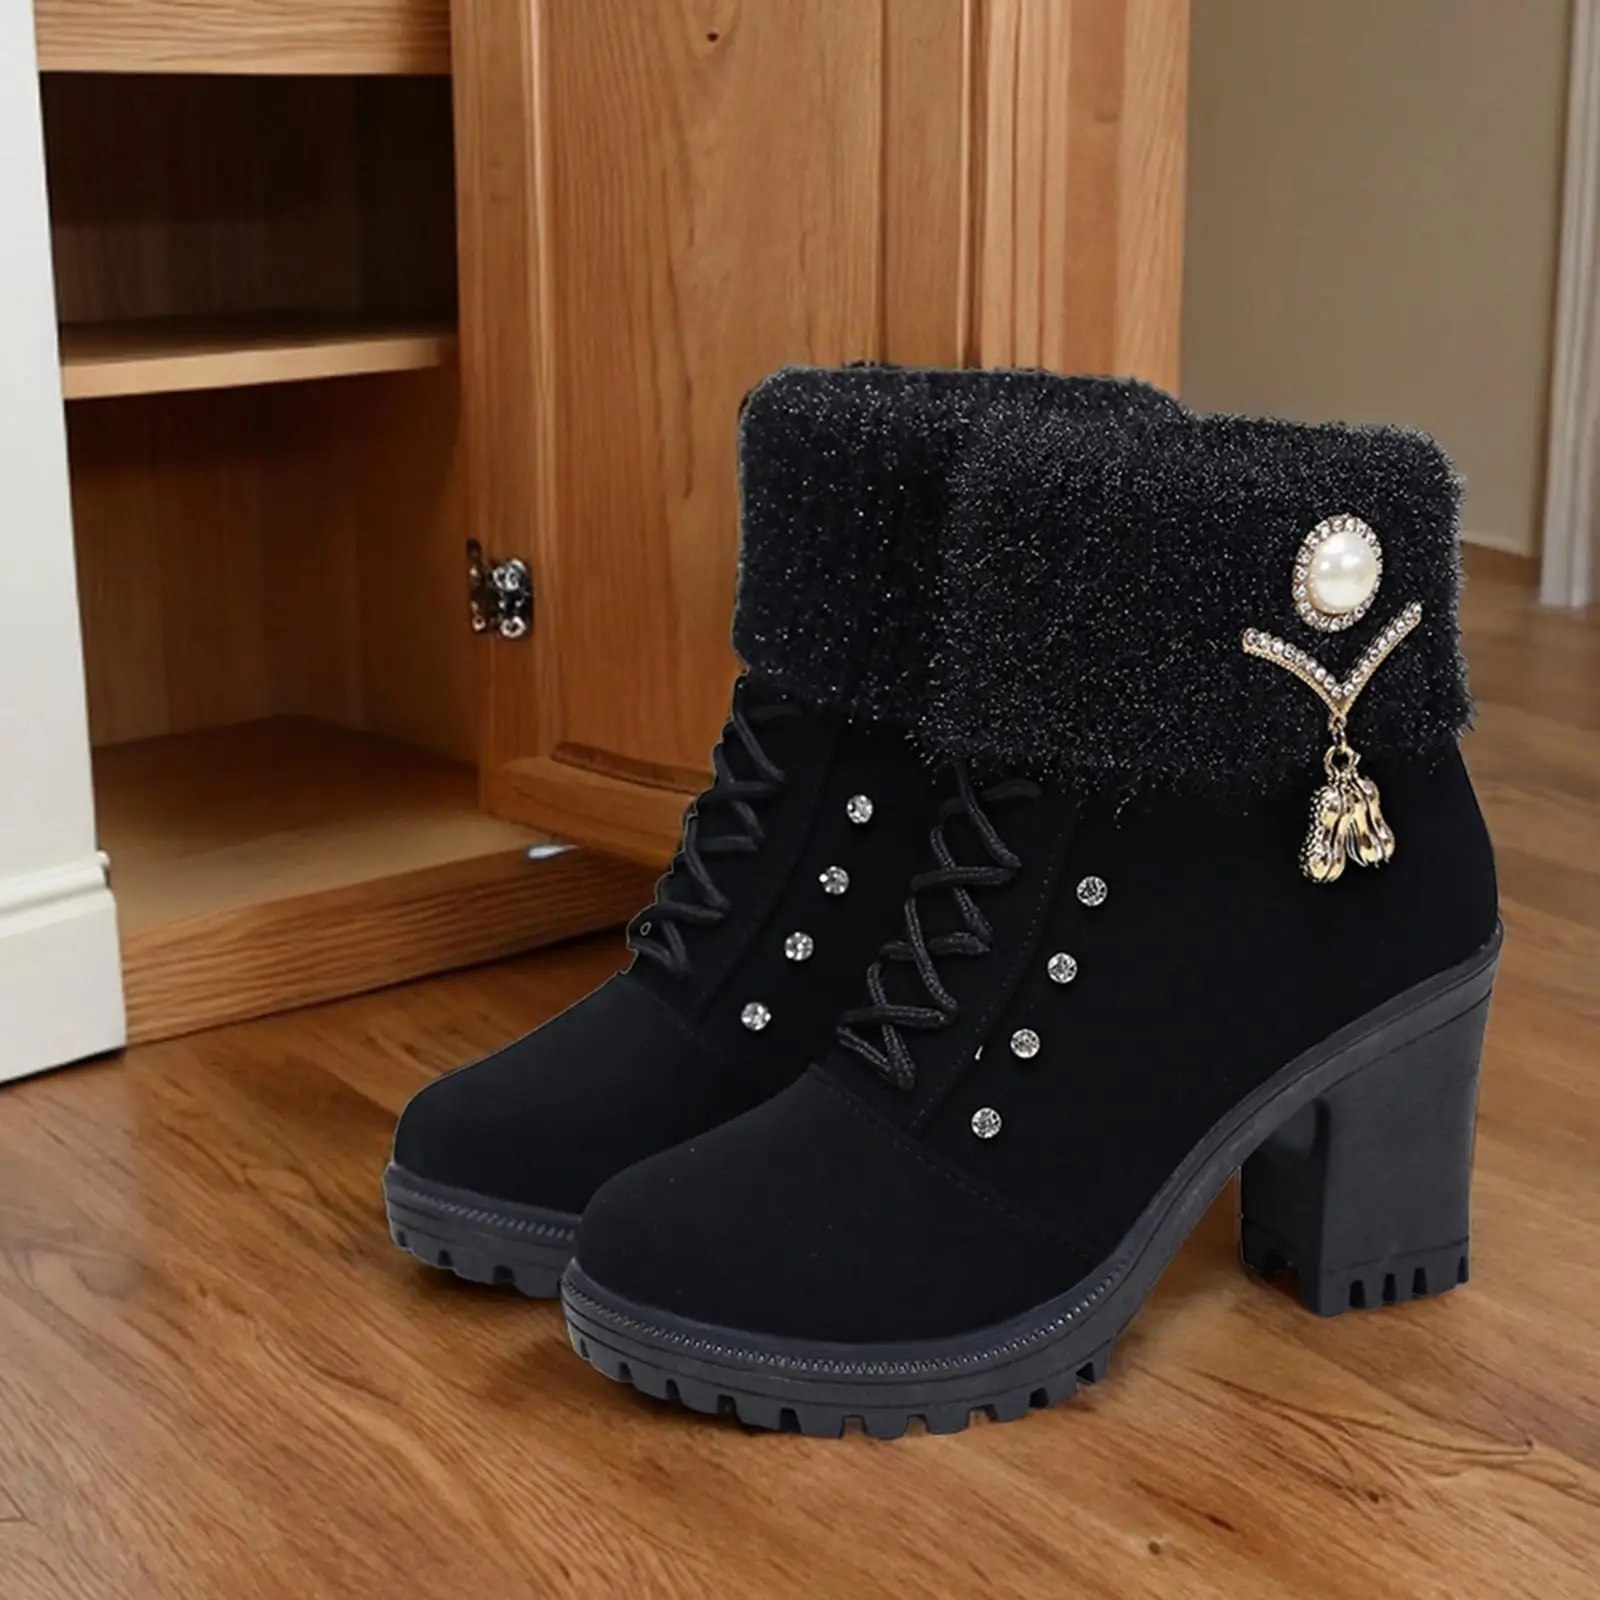 Women Winter Boots Side Zipper Fashion High Heeled Short Boots for Dresses Casual Chunky Heel Cold Weather Dressy Ankle Booties